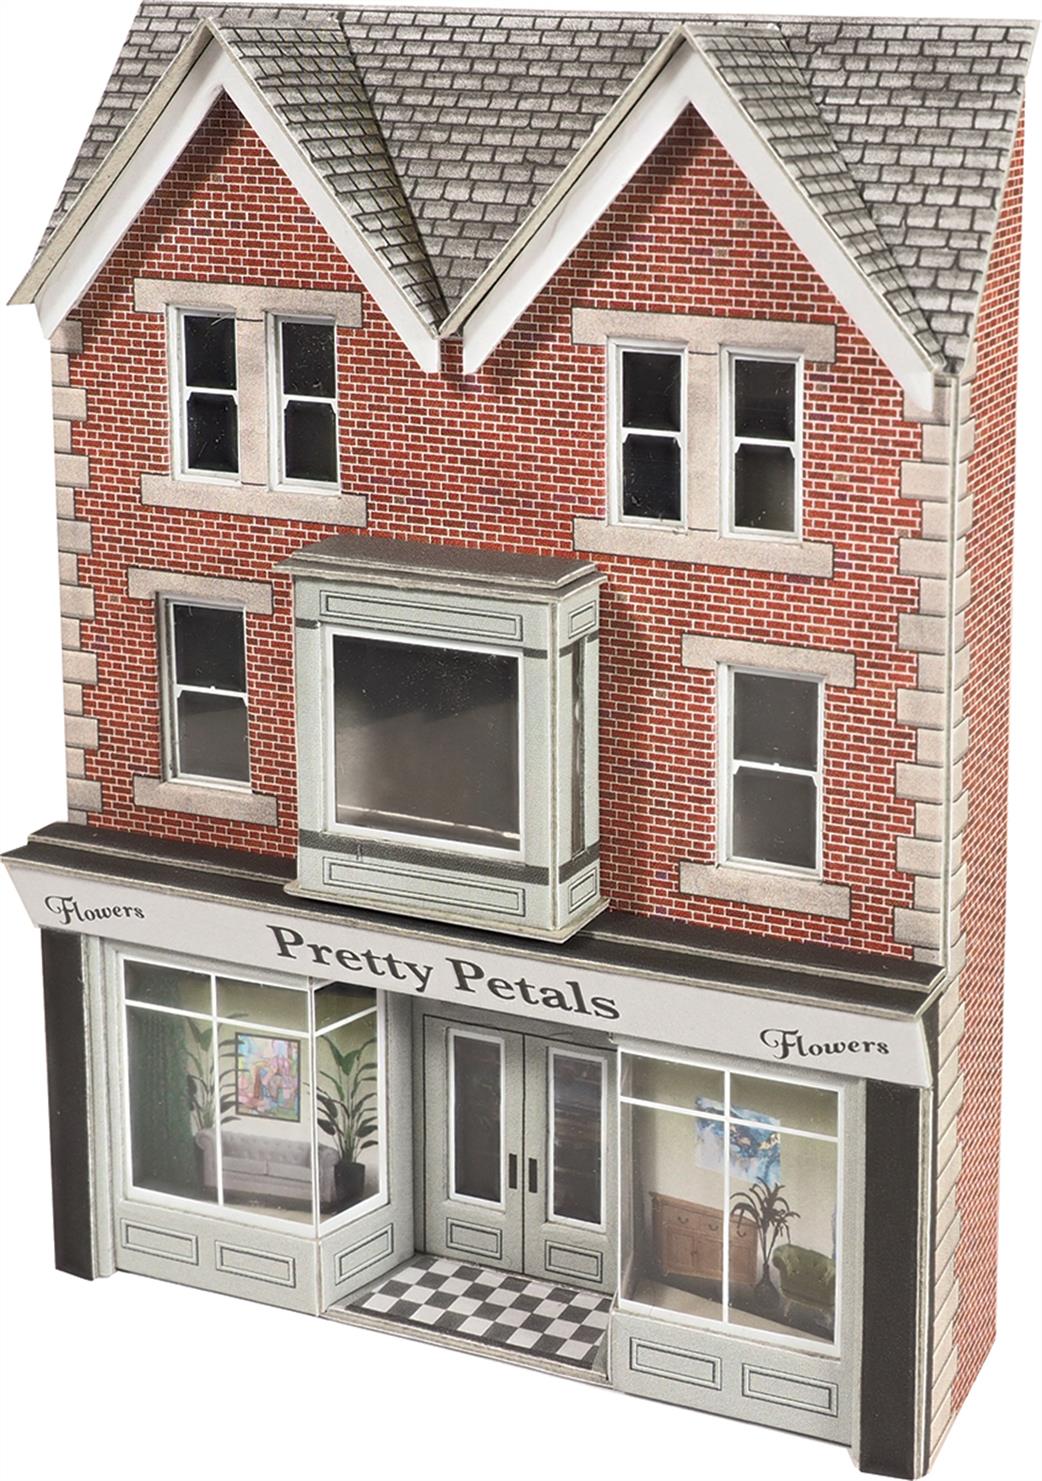 Metcalfe OO PO374 High Street Shop Frontage Low Relief Card Kit